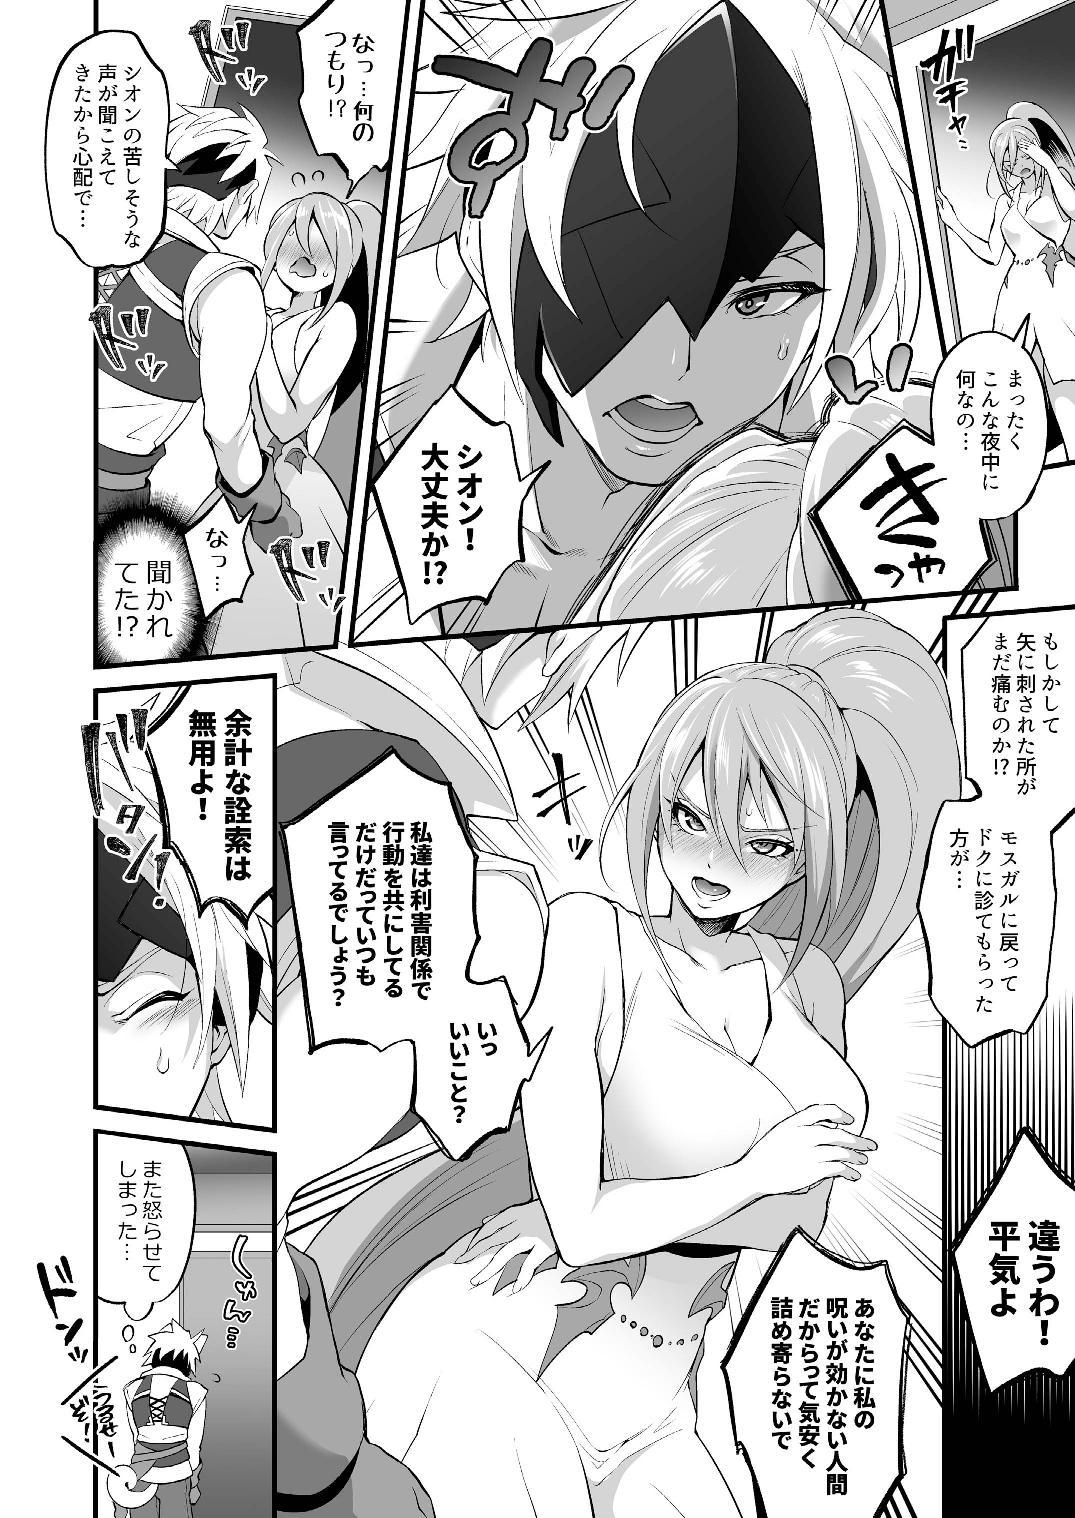 Taiwan 私に詰め寄ると〇〇〇がイくわよ…! - Tales of arise Hardcore Rough Sex - Page 8